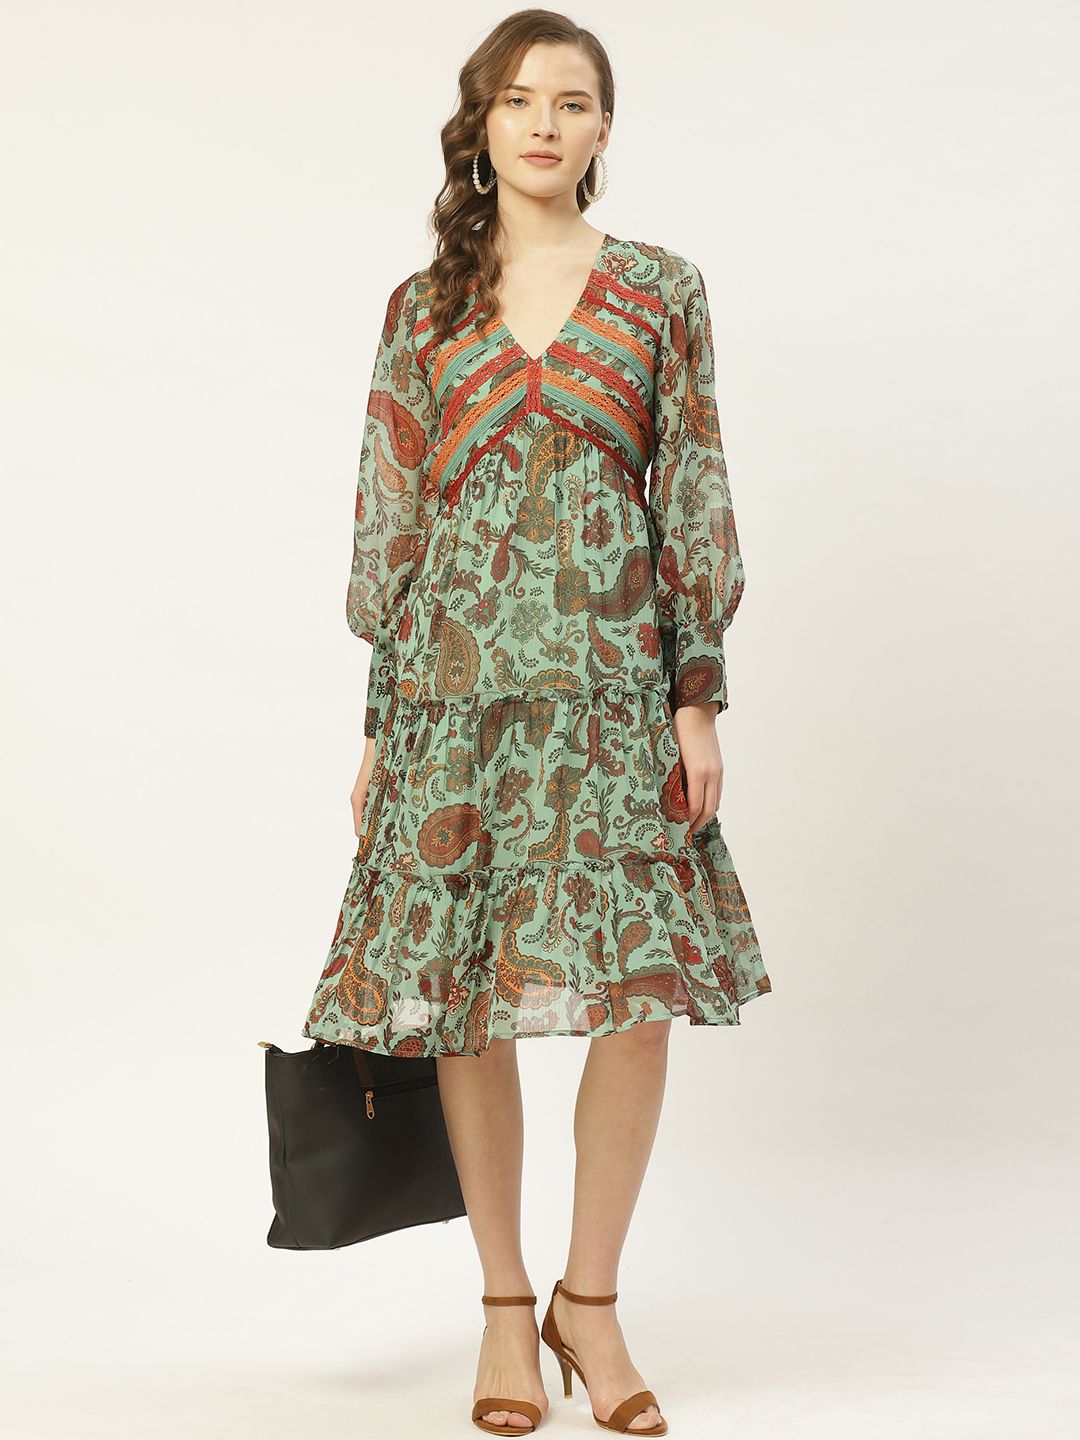 Antheaa Women Mint Green & Orange Paisley Print Tiered A-Line Dress with Lace Inserts Price in India